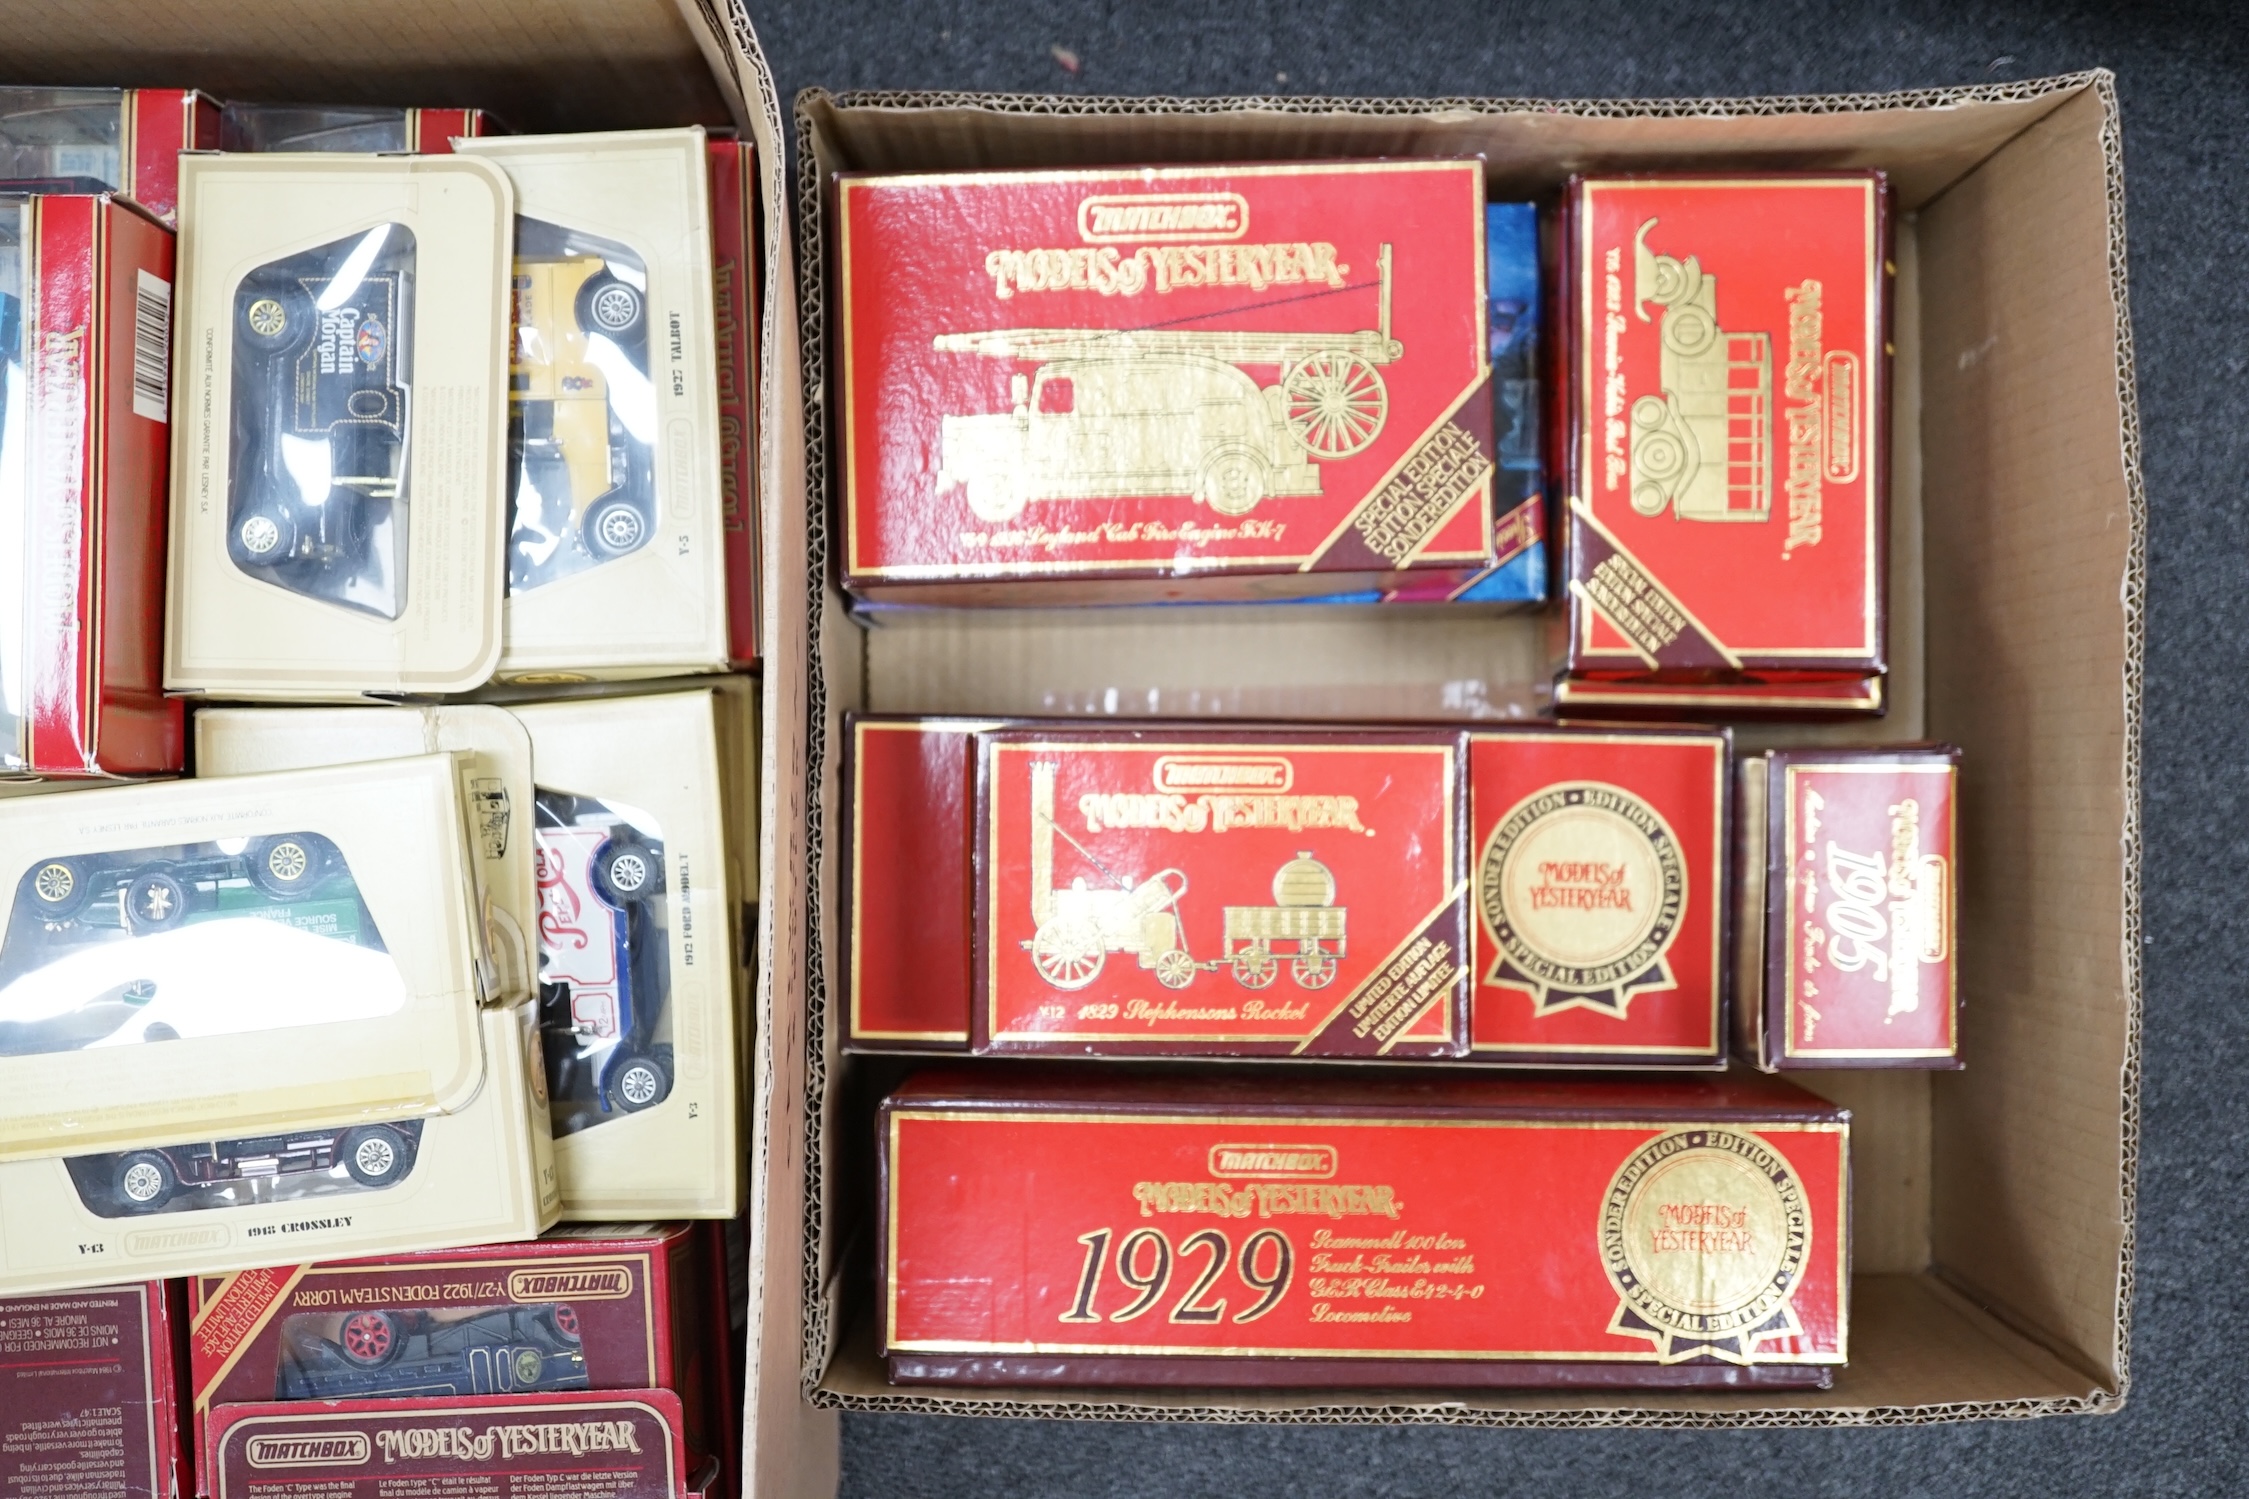 Sixty-six Matchbox Models of Yesteryear, in cream or maroon era boxes, including cars, commercial - Image 9 of 12